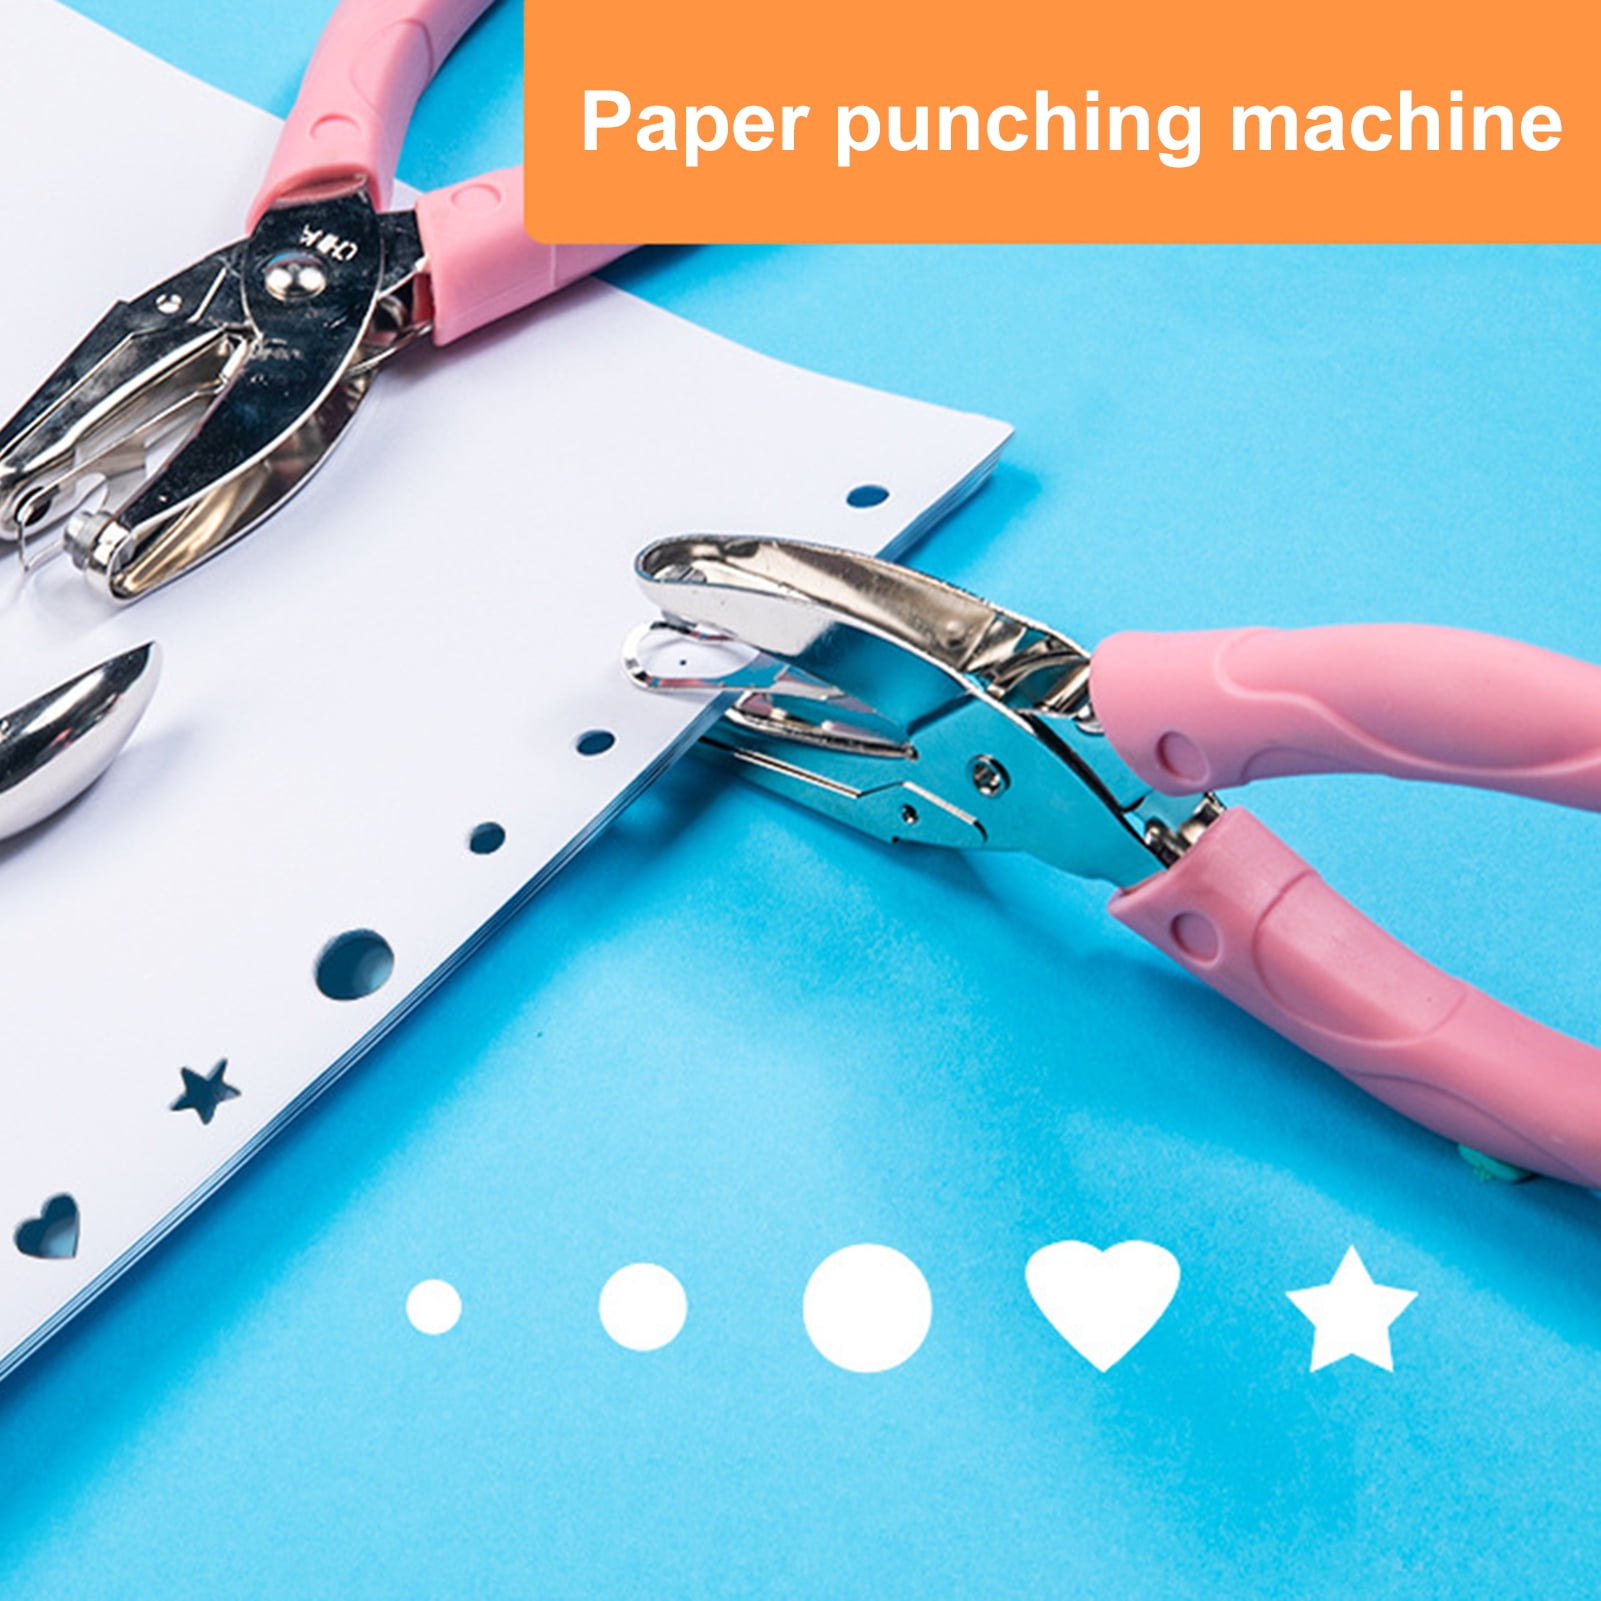  AIEX 3mm Circle Hole Punch, Small Handheld Paper